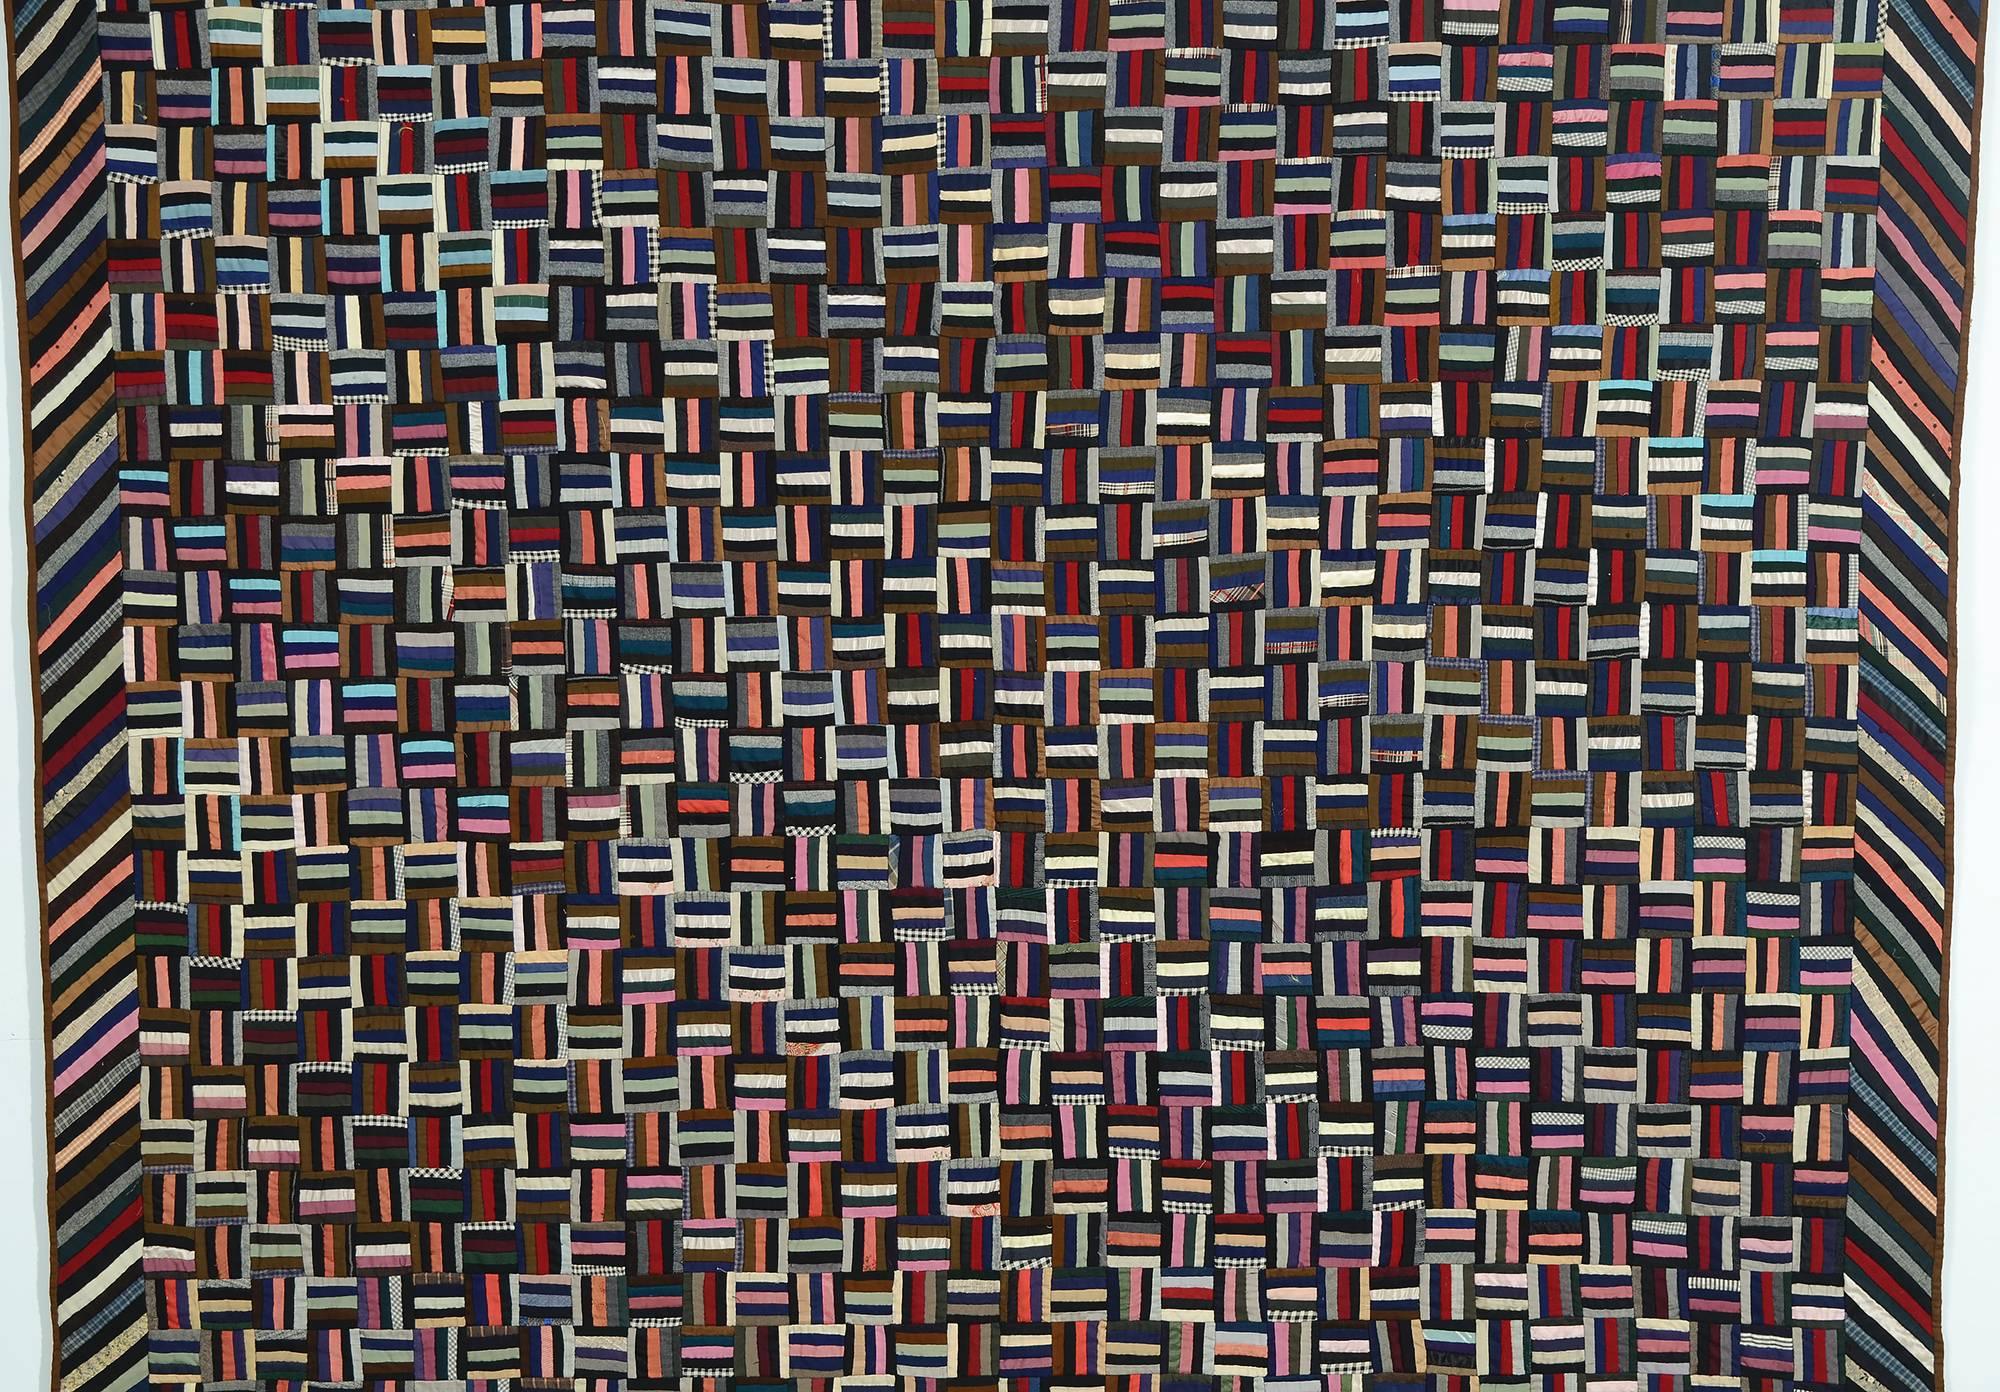 This Fence Rail Log Cabin quilt has an equally dominant secondary pattern. The use of color provides a diagonal design of Straight Furrows as well. 
The small-scale of the blocks makes for very intense patterning. Each block is about two inches to